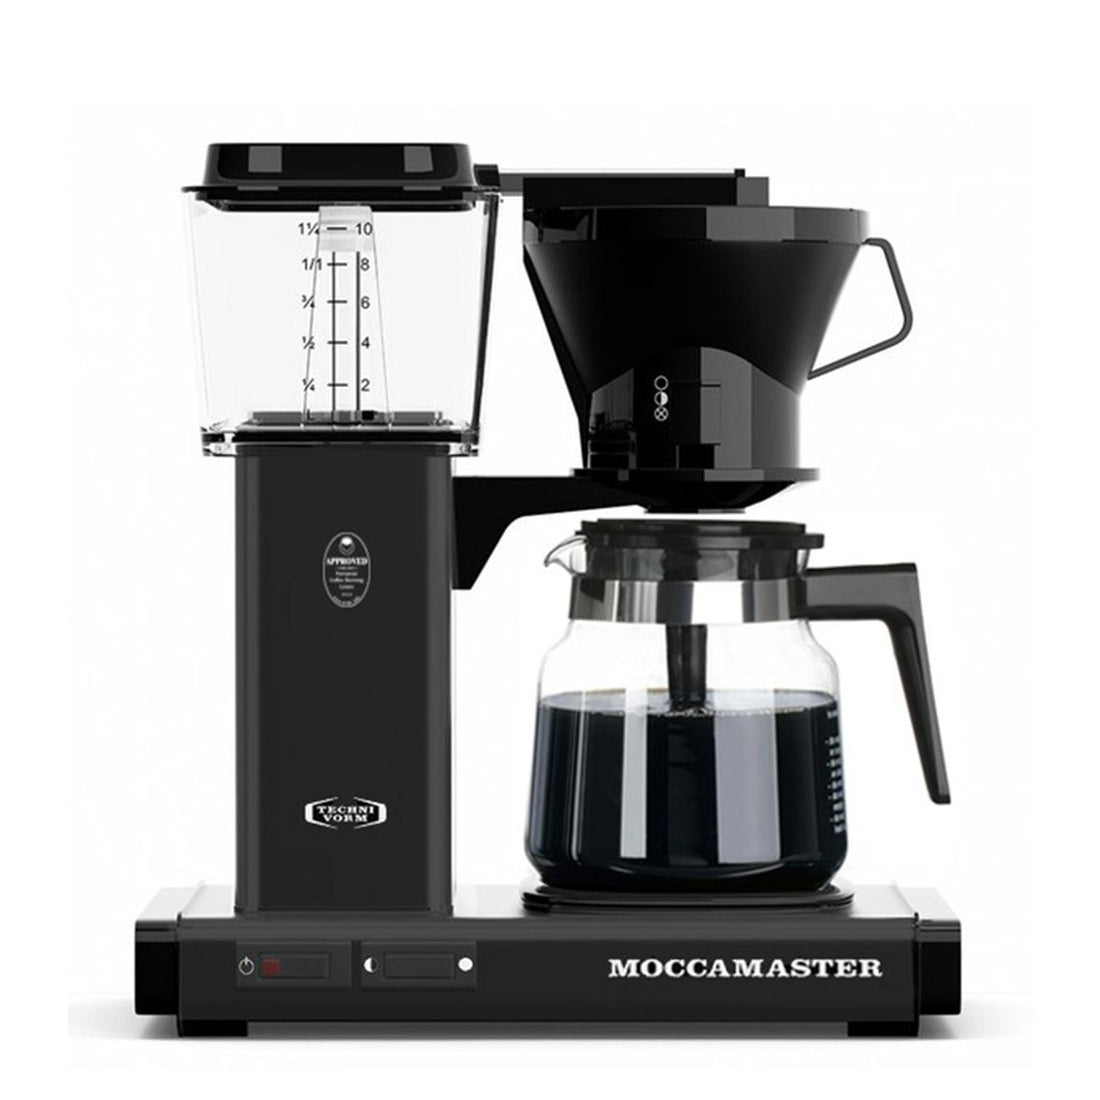 Moccamaster KB 741 specifications